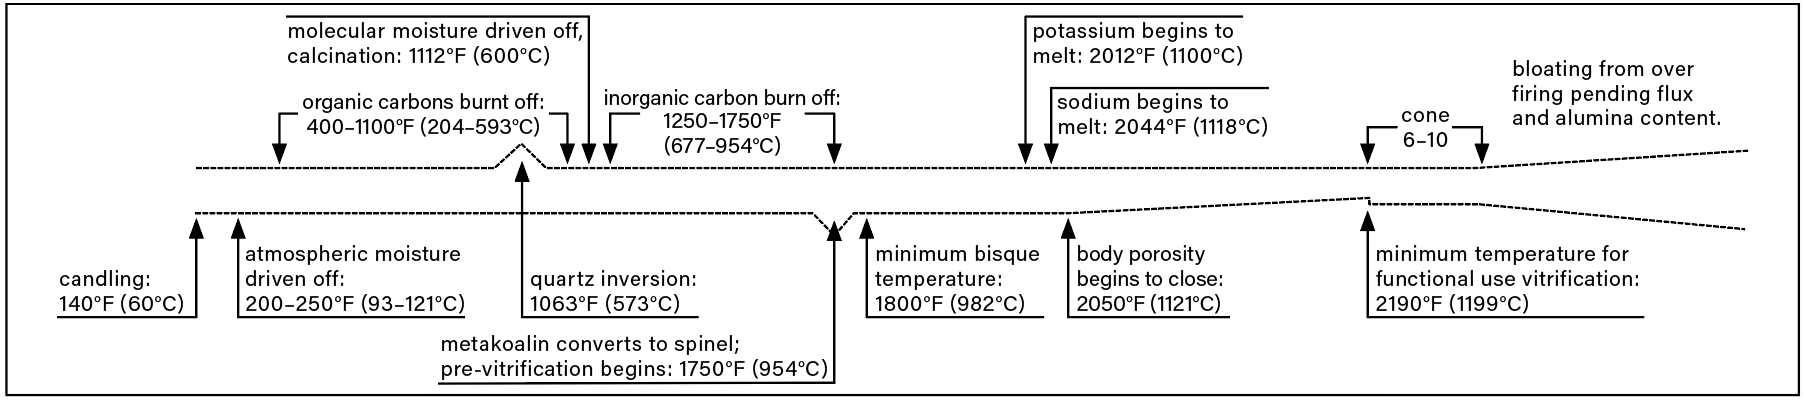 1 This firing graph shows the effect of heat on the various materials and contaminants found in a clay body. Divots represent critical physical changes in the clay before the body begins to vitrify at 2050°F (1121°C).